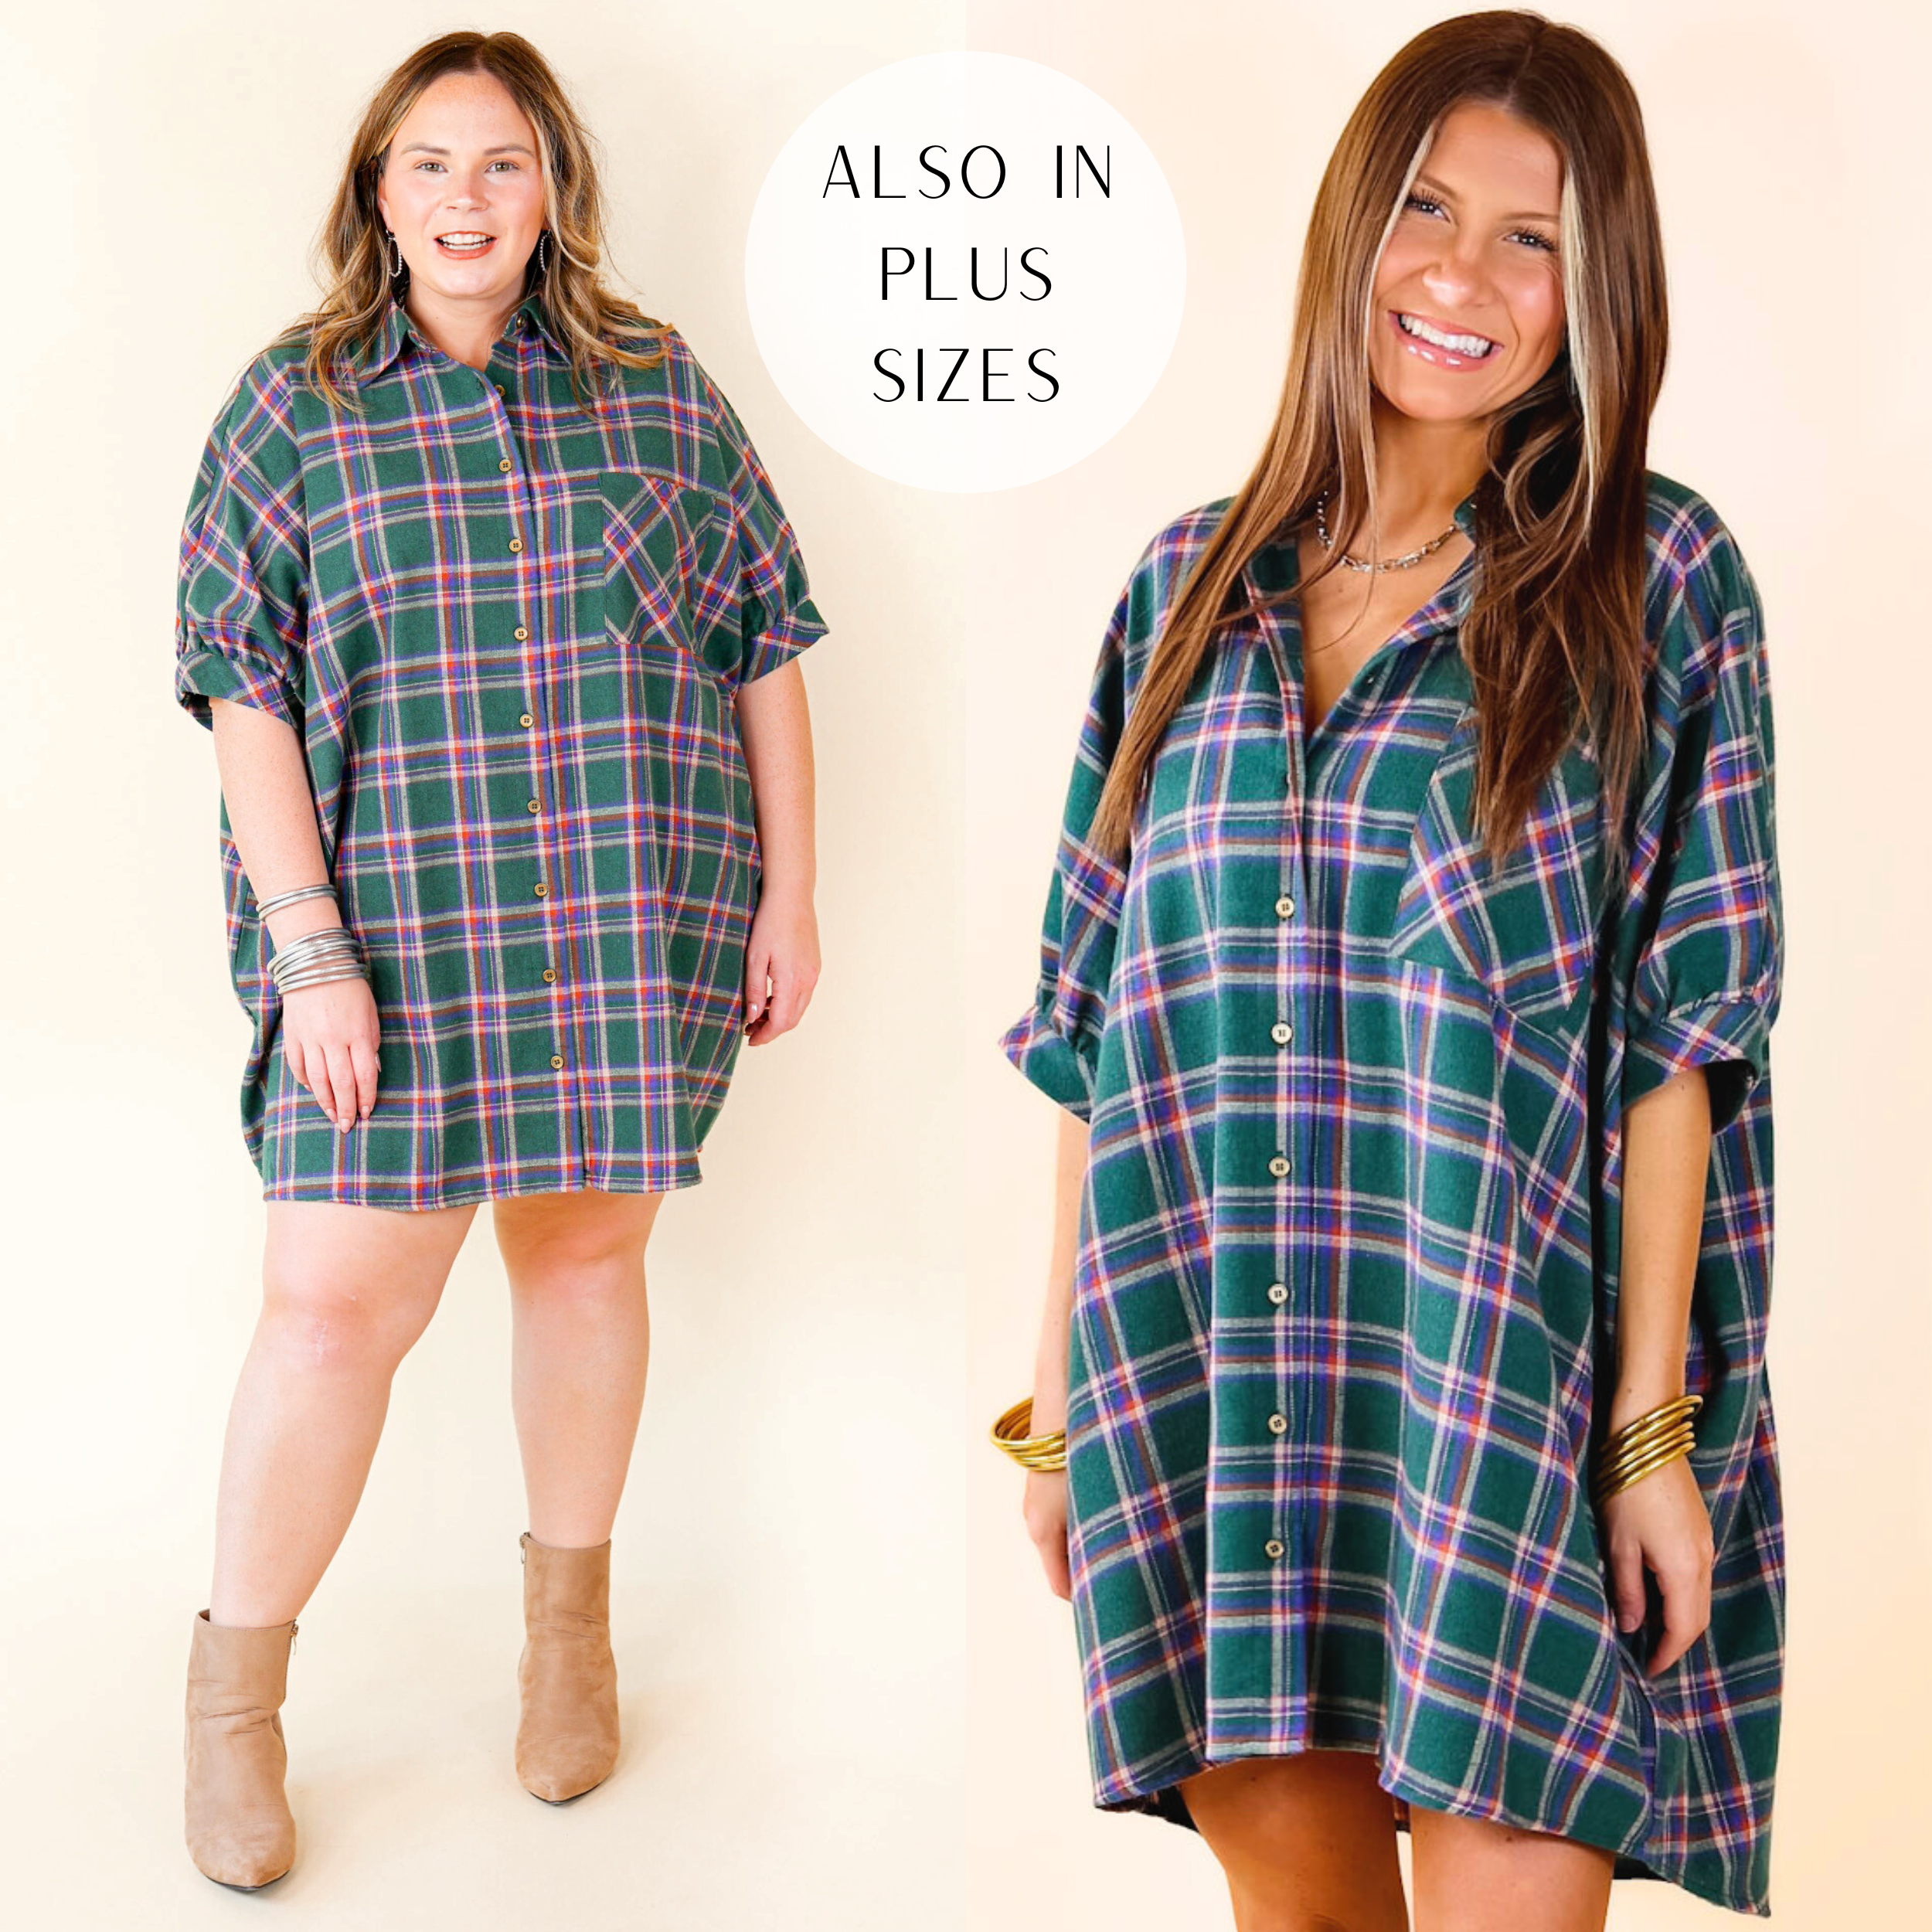 Model is wearing an oversized plaid dress with a button up front, collared neckline, and short sleeves. Model has it paired with white boots and gold jewelry.